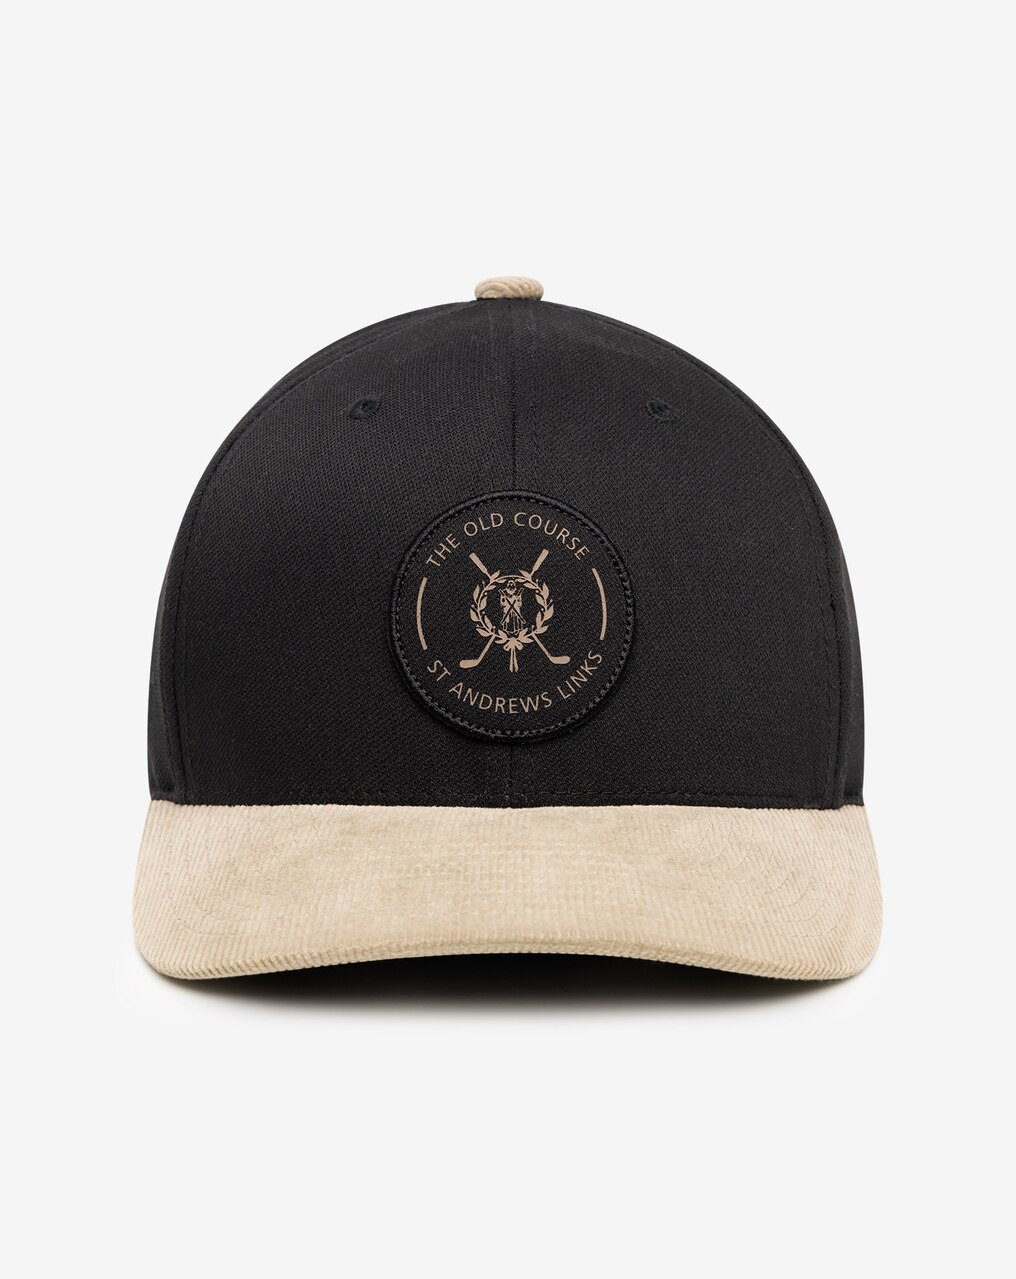 ST ANDREWS ANCIENT AND AWESOME SNAPBACK HAT 1